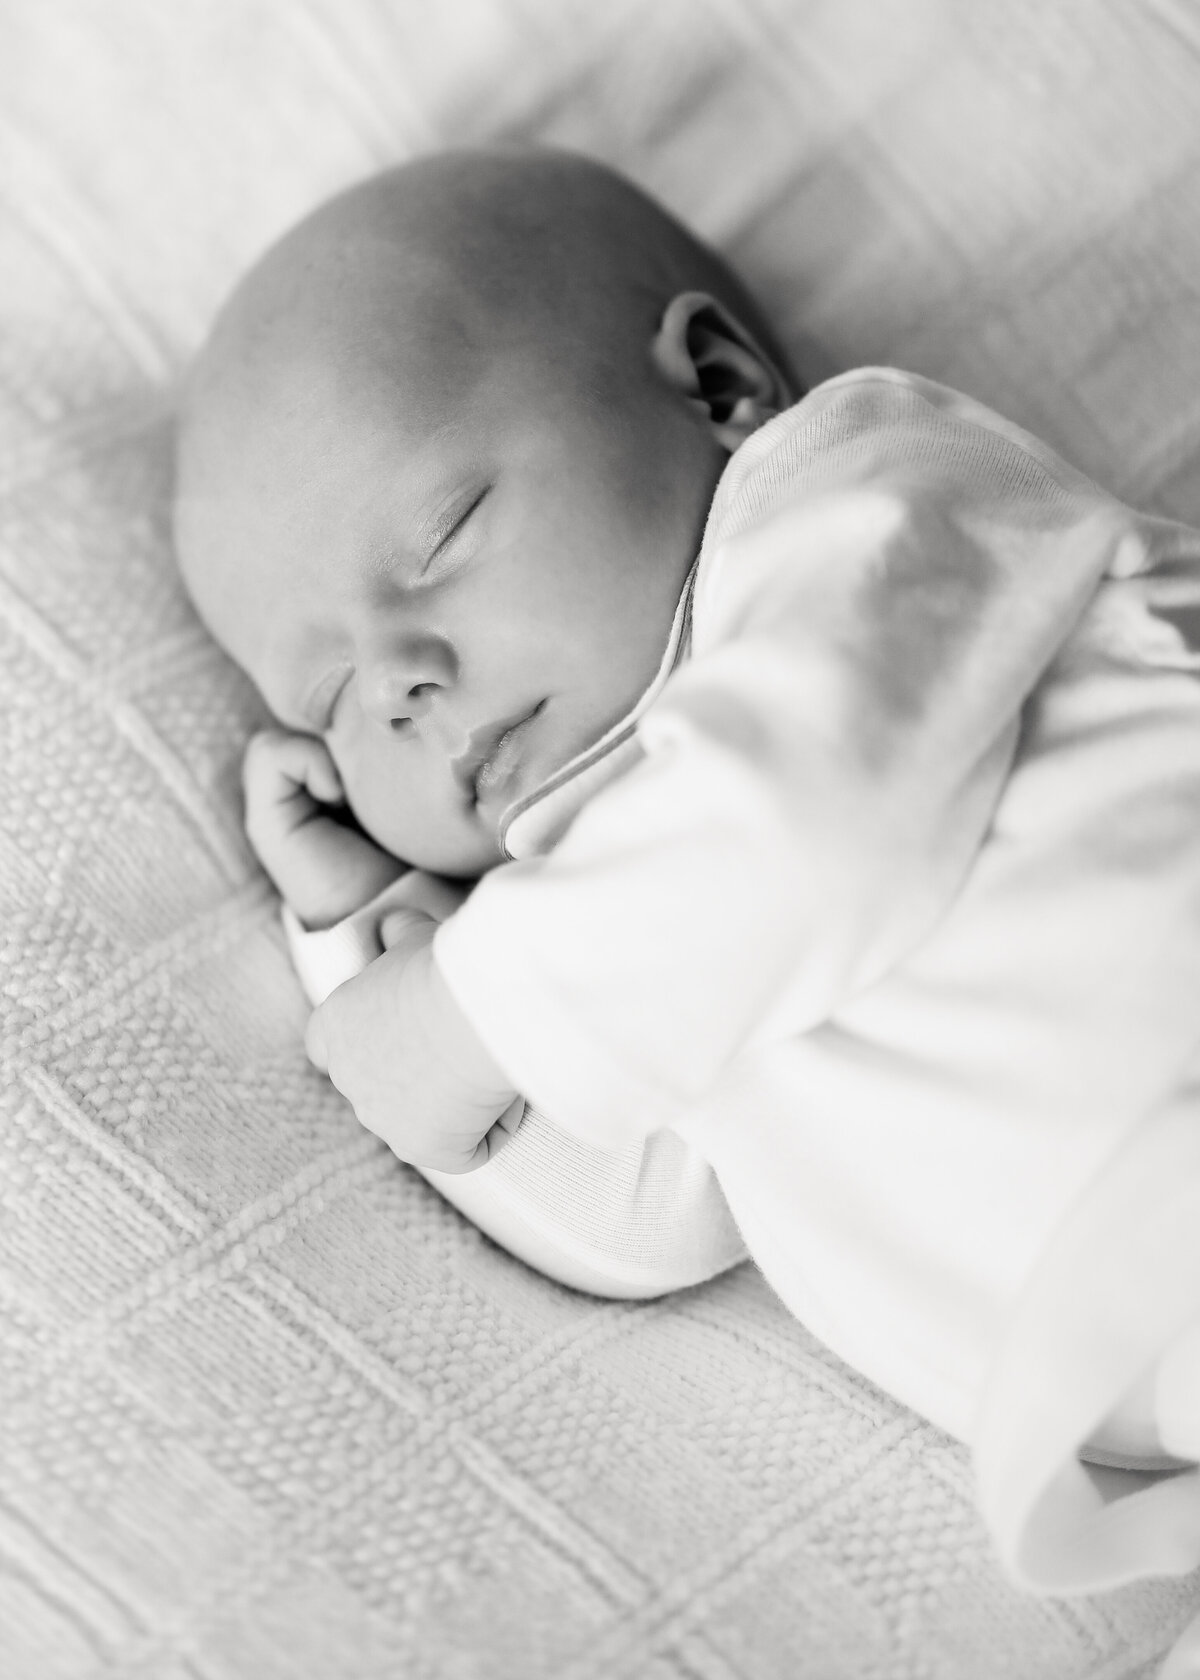 Vanessa is an experienced baby photographer who covers the area of Haslemere, Godalming, Guildford and Cranleigh